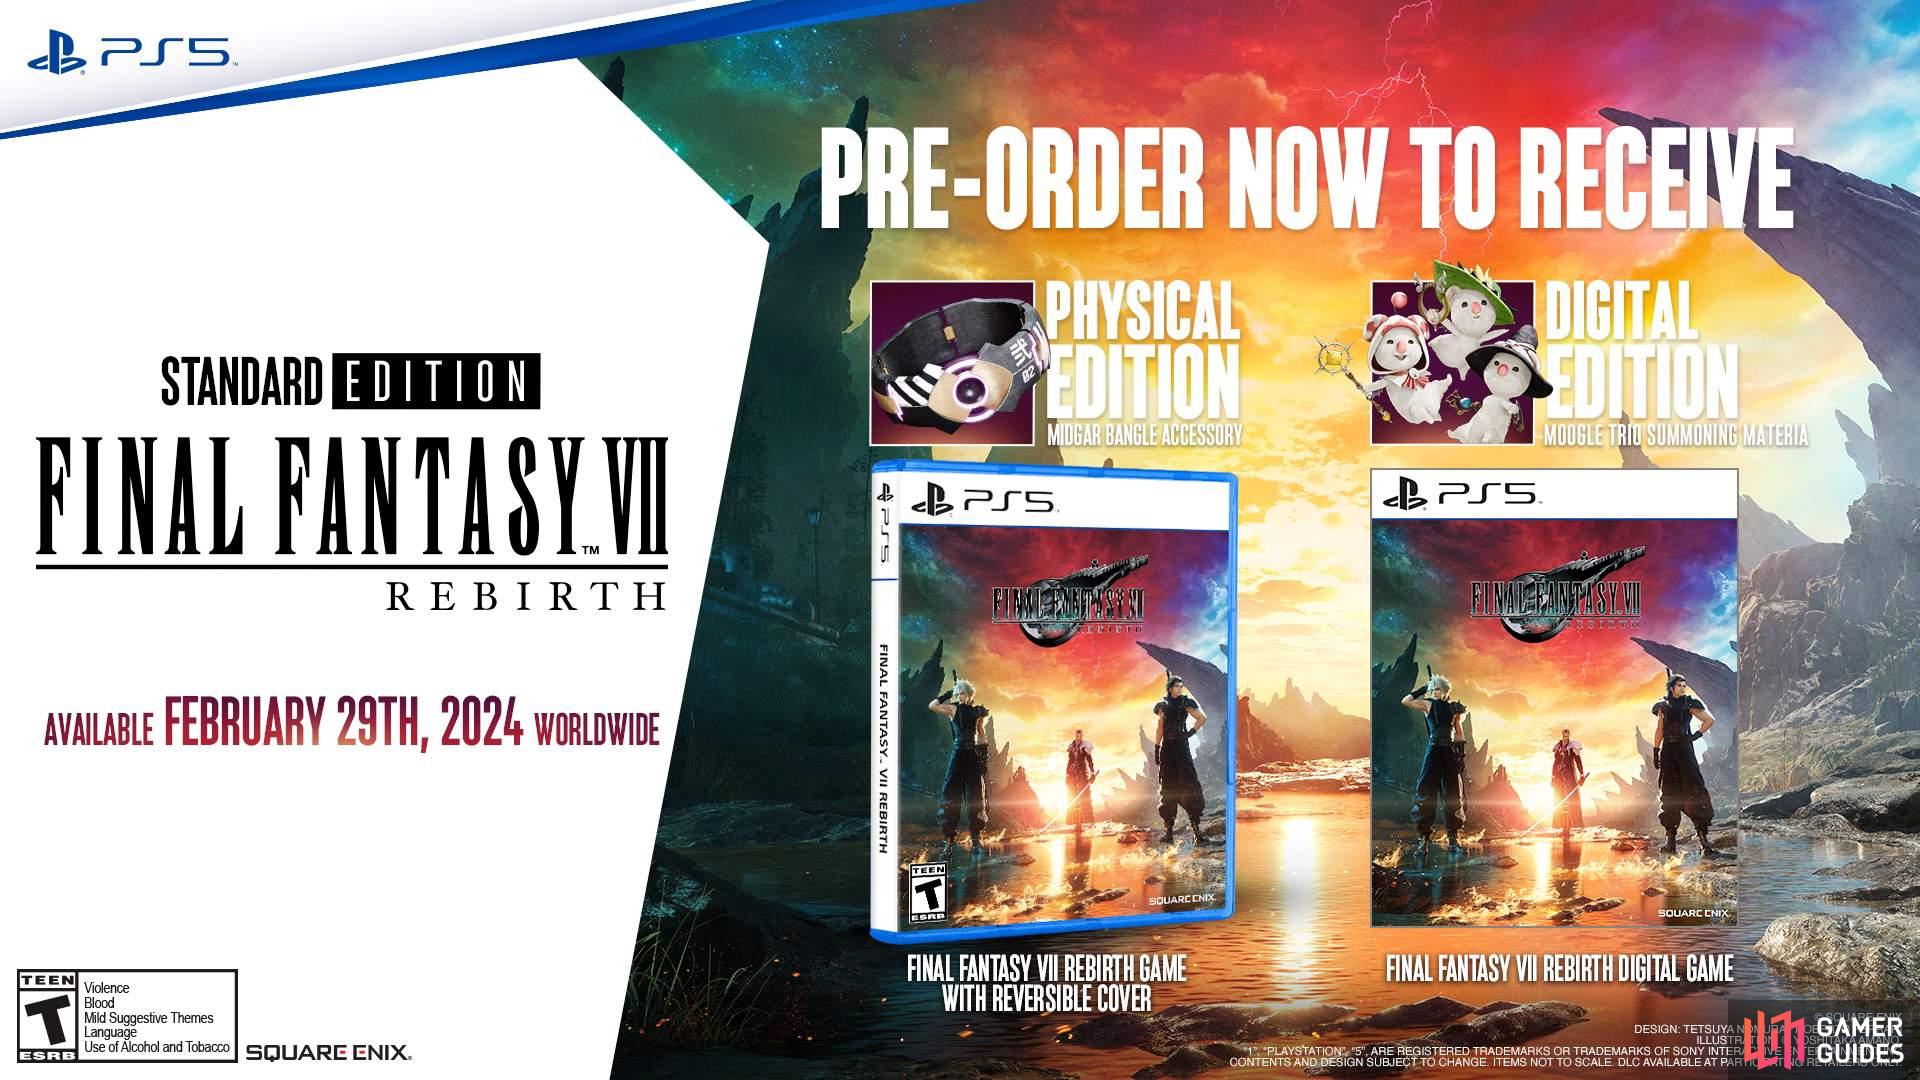 The Standard Edition includes a pre-order bonus along with the game.